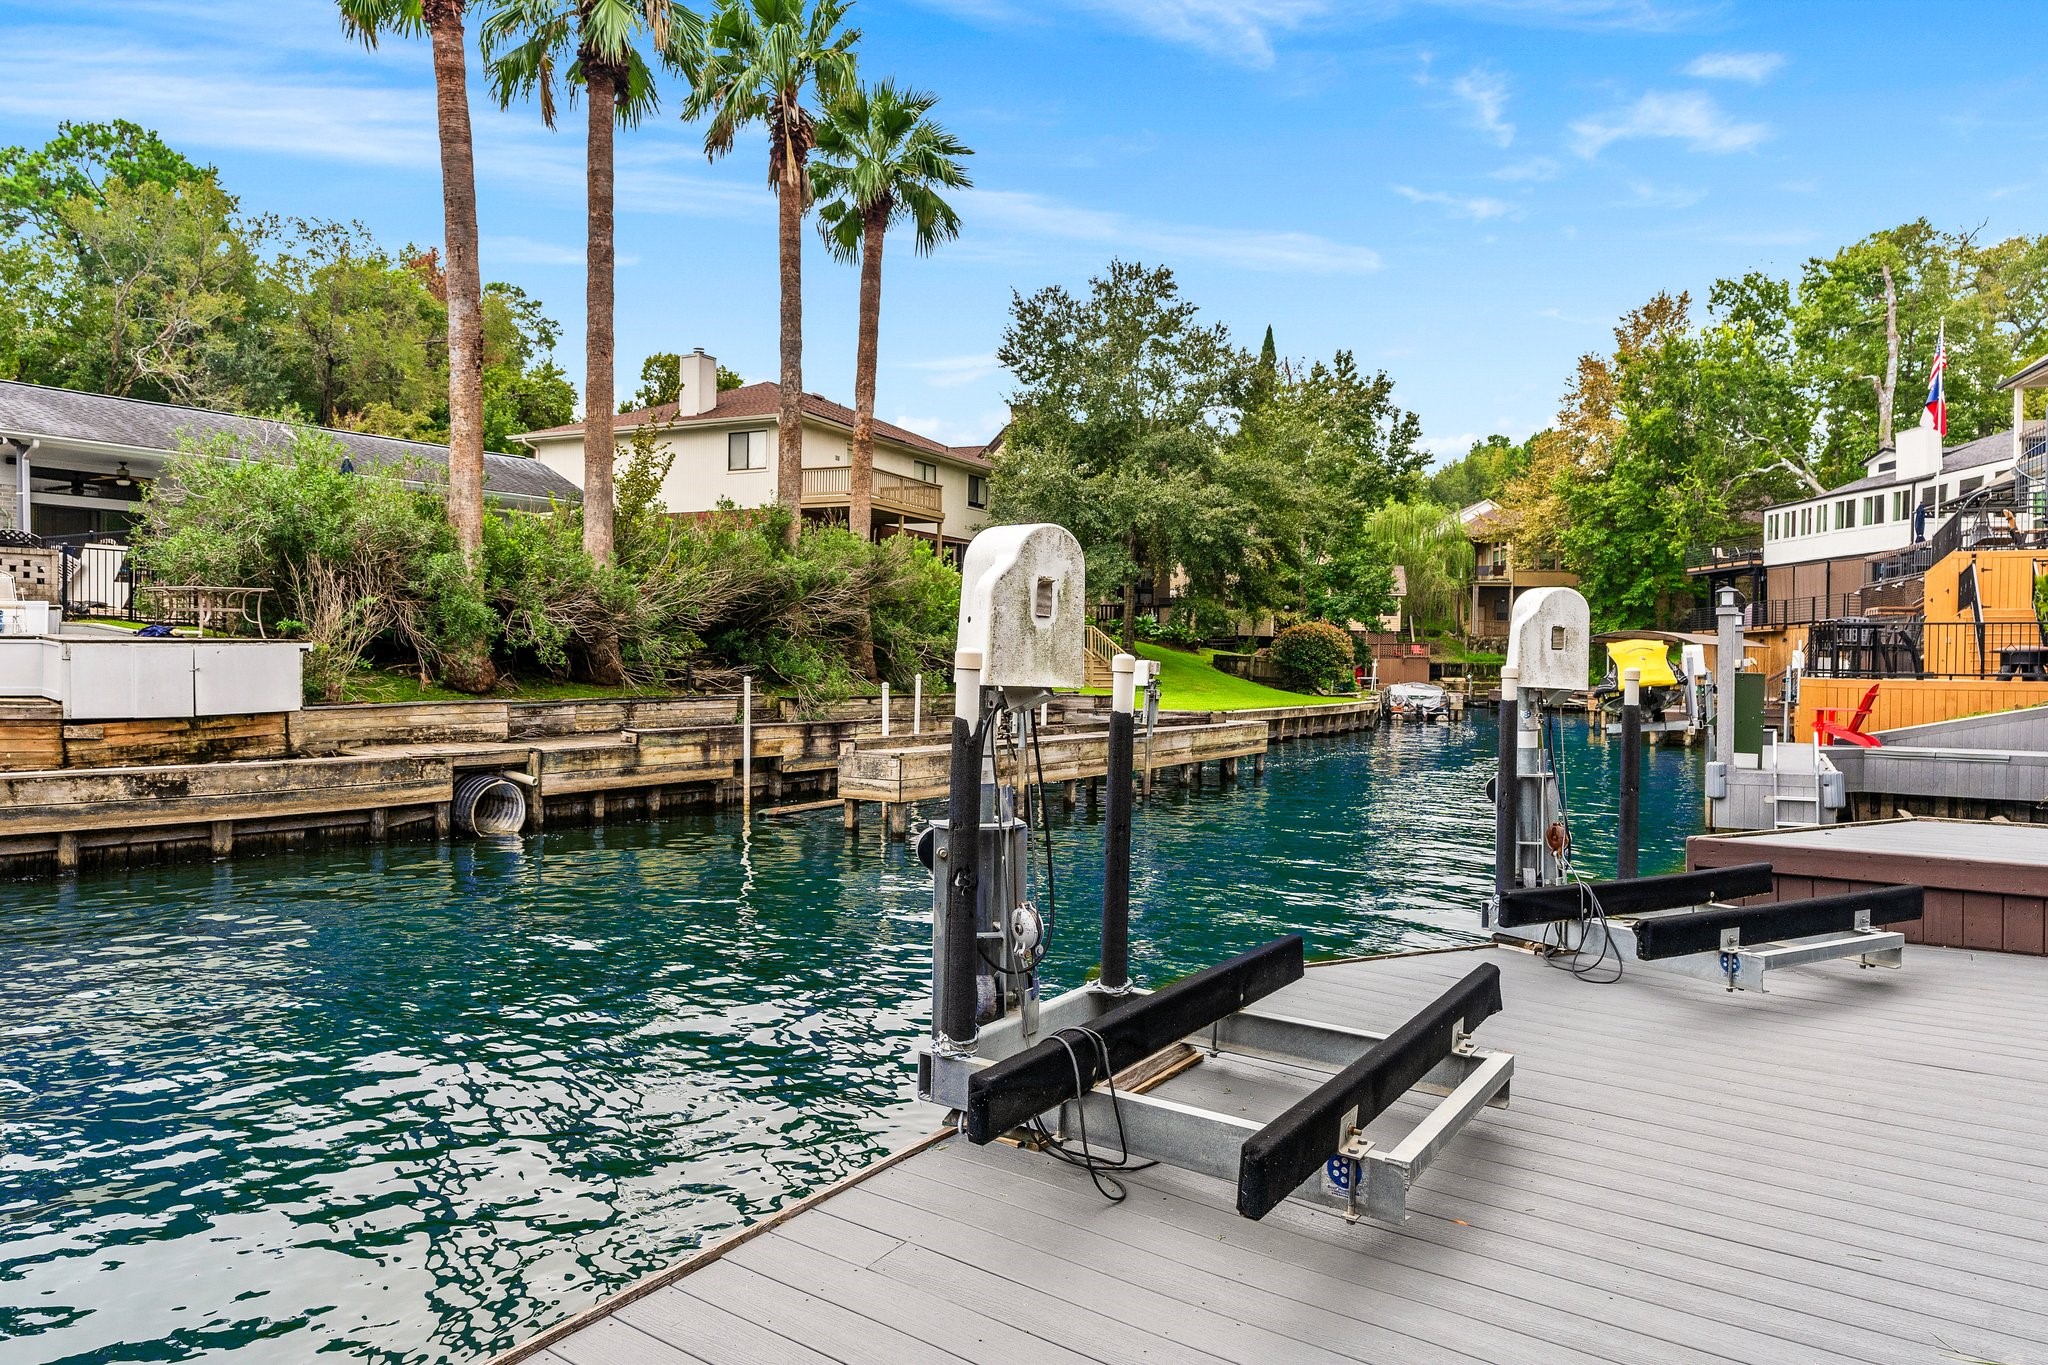 The two jet ski lifts swing around to electrically lower into the water then sit on deck for easy access to clean when finished playing in the lake!